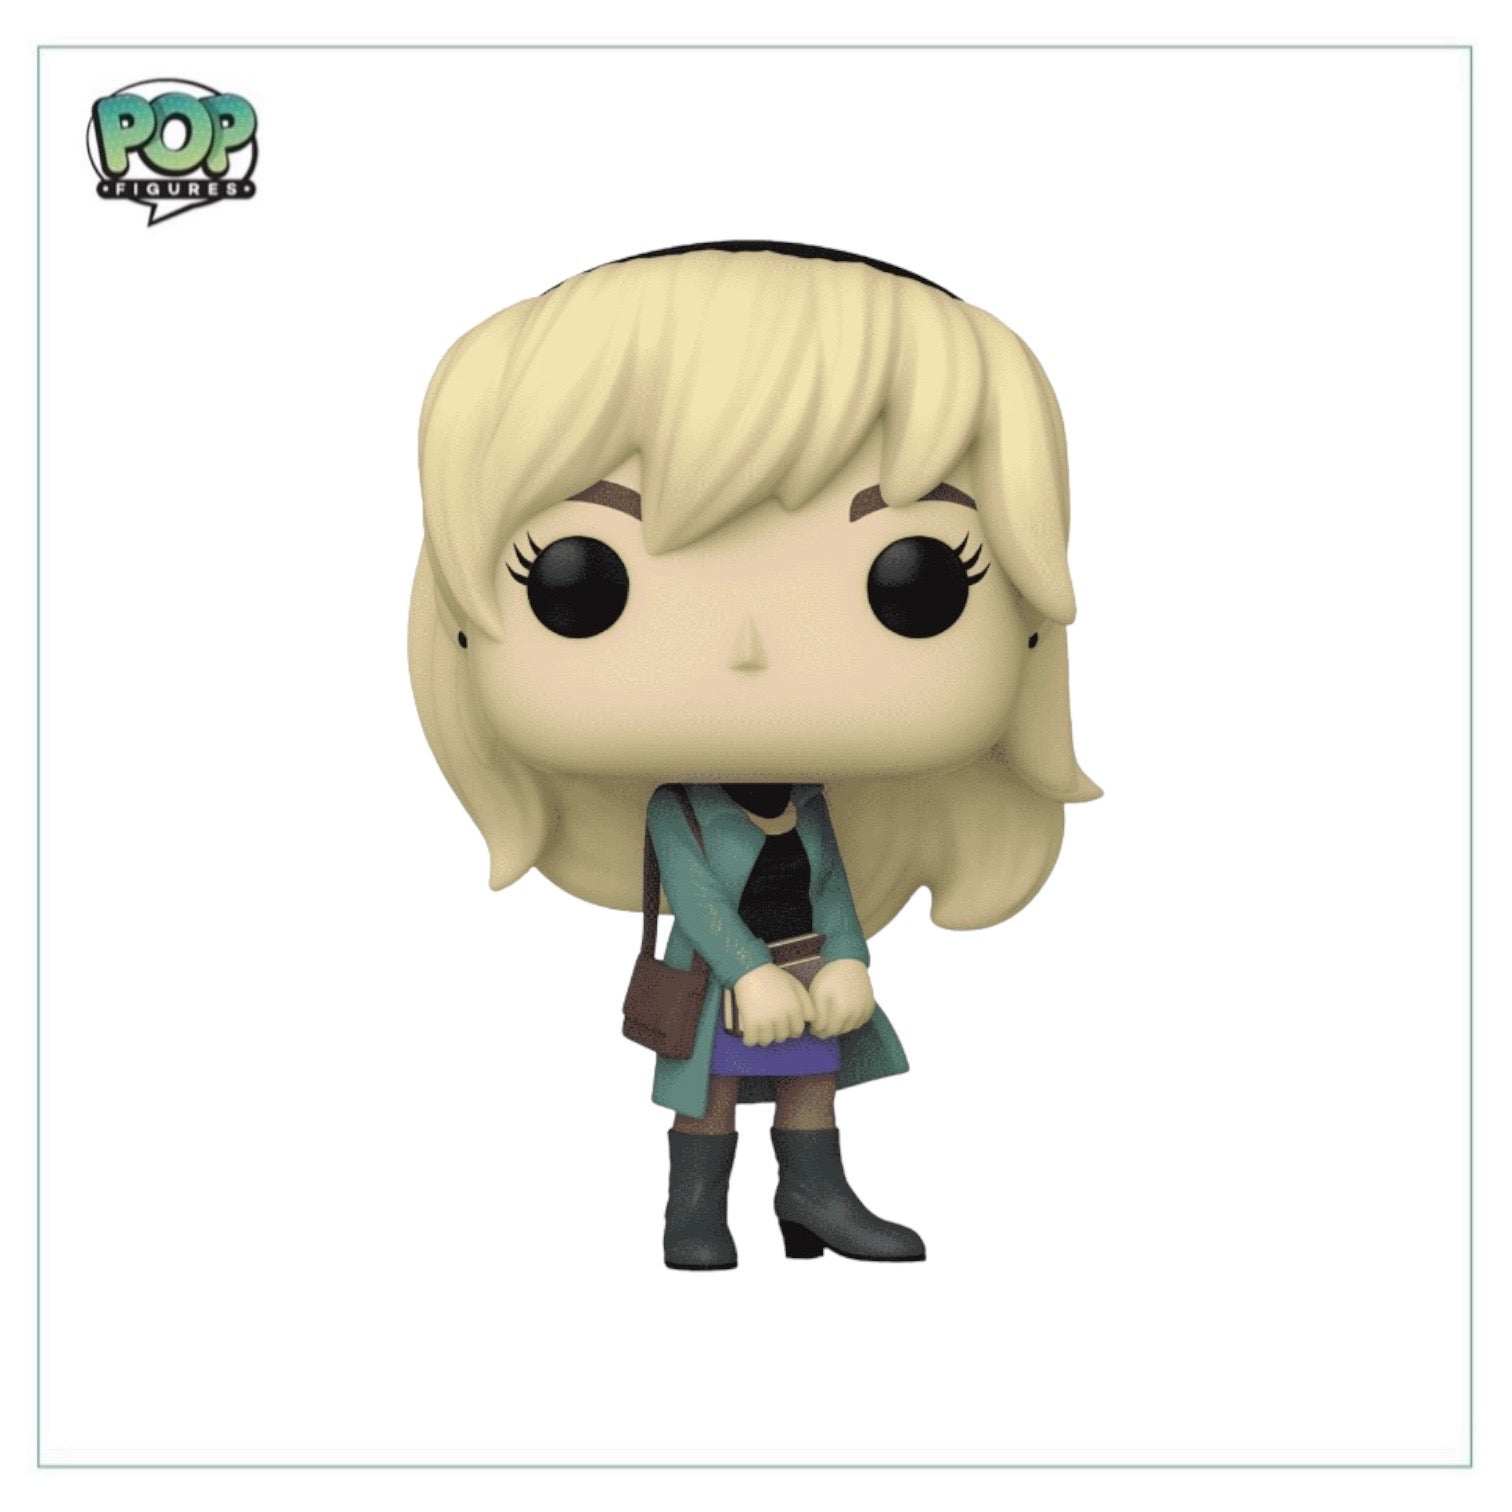 Gwen Stacy #1275 Funko Pop! - Marvel - Entertainment Earth Exclusive